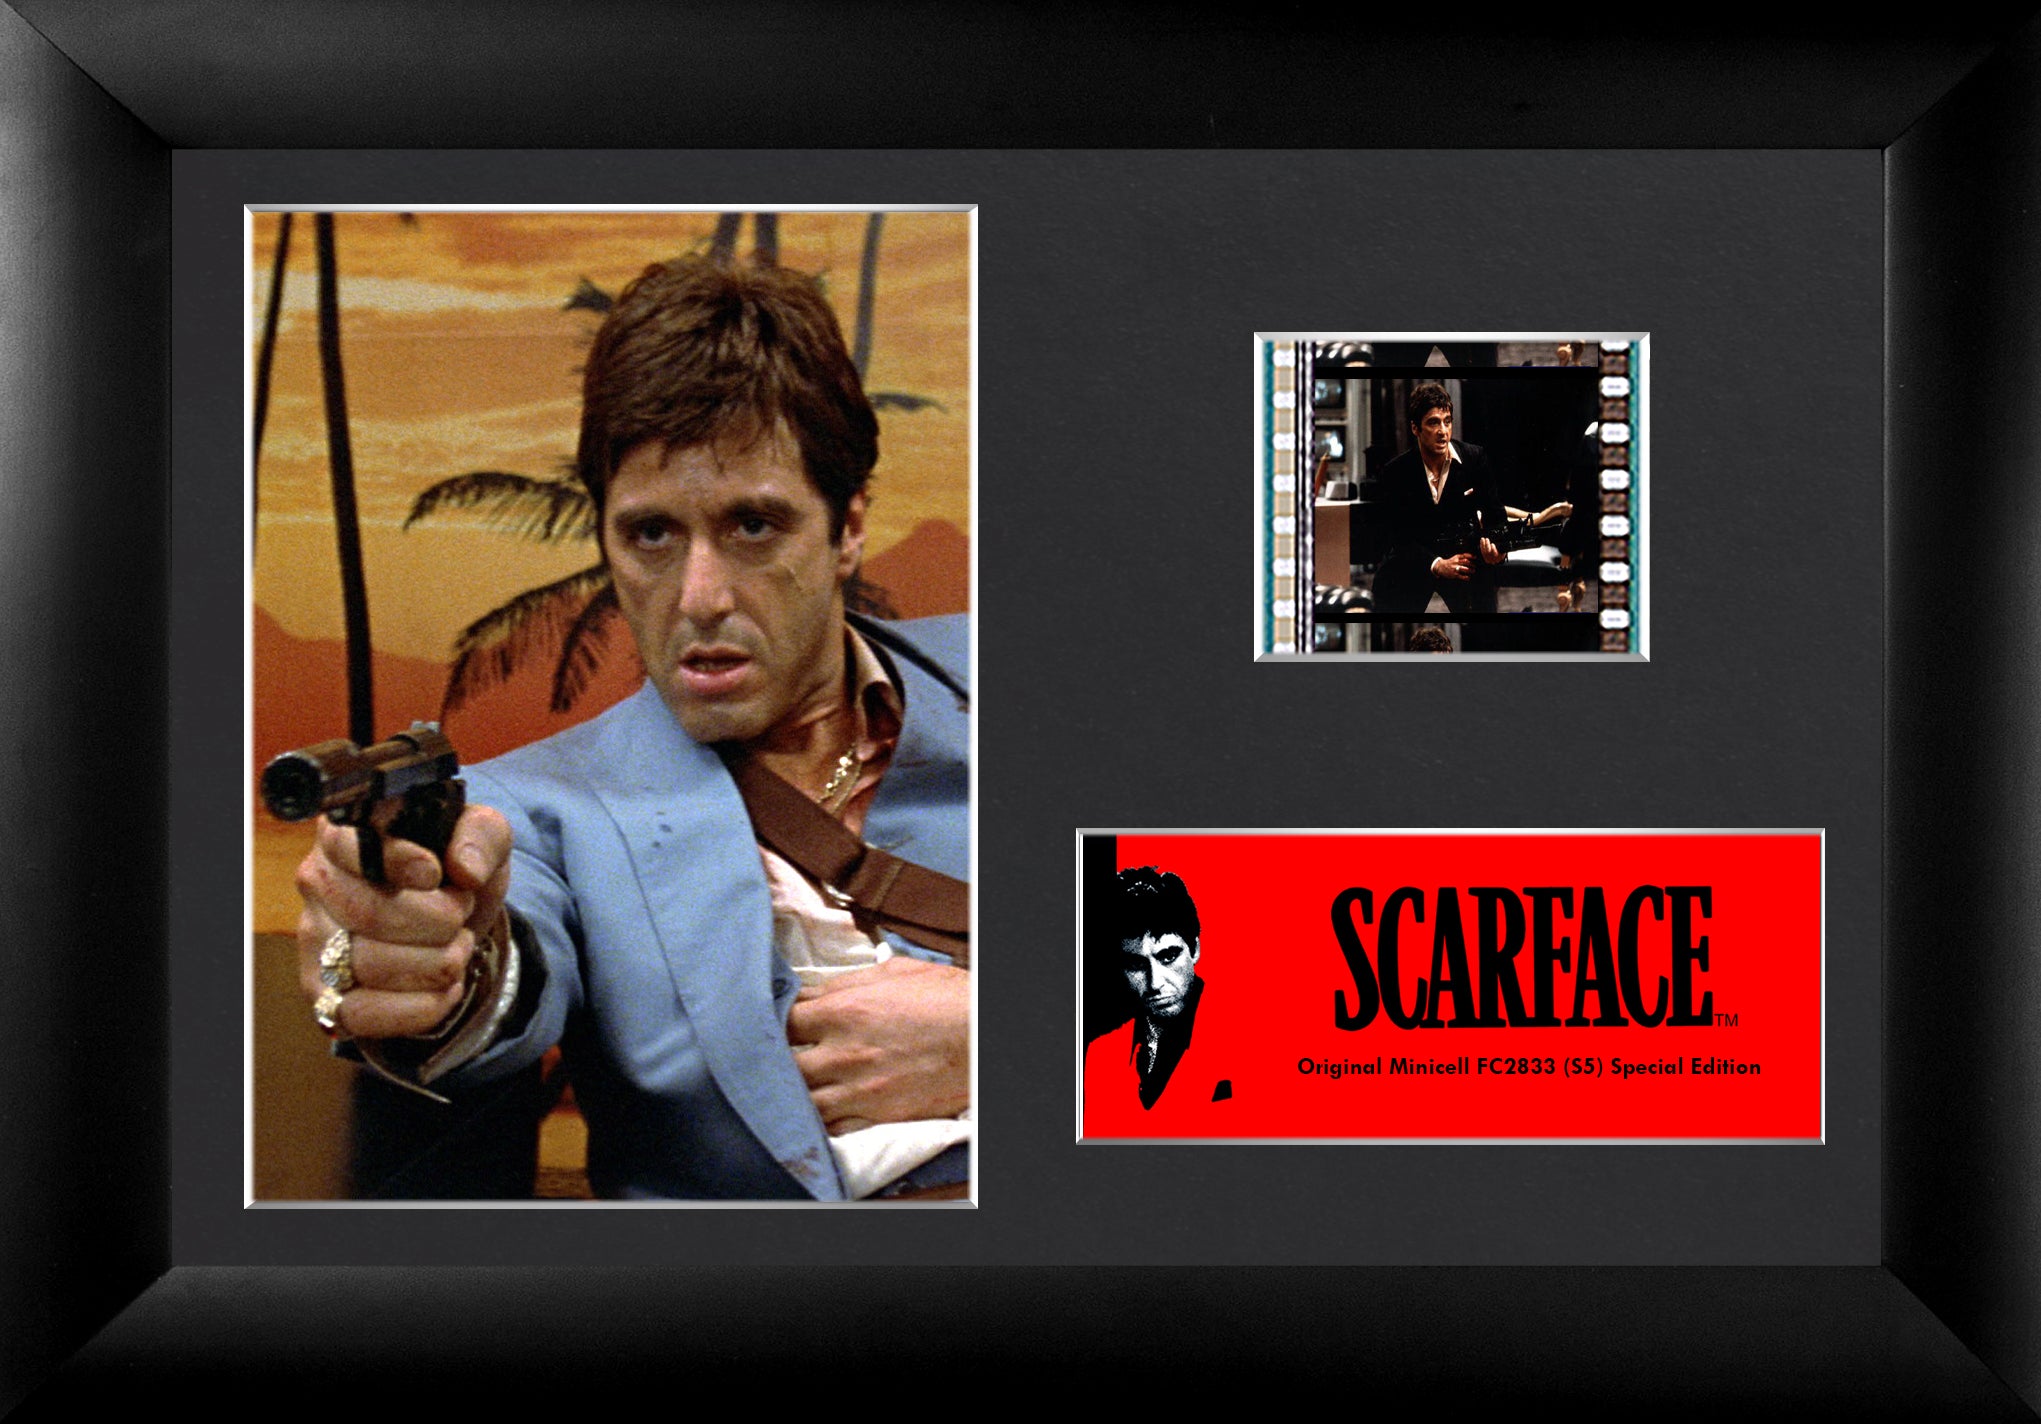 Scarface (Tony Montana Blue Suit) Minicell FilmCells Presentation with Easel Stand USFC2833